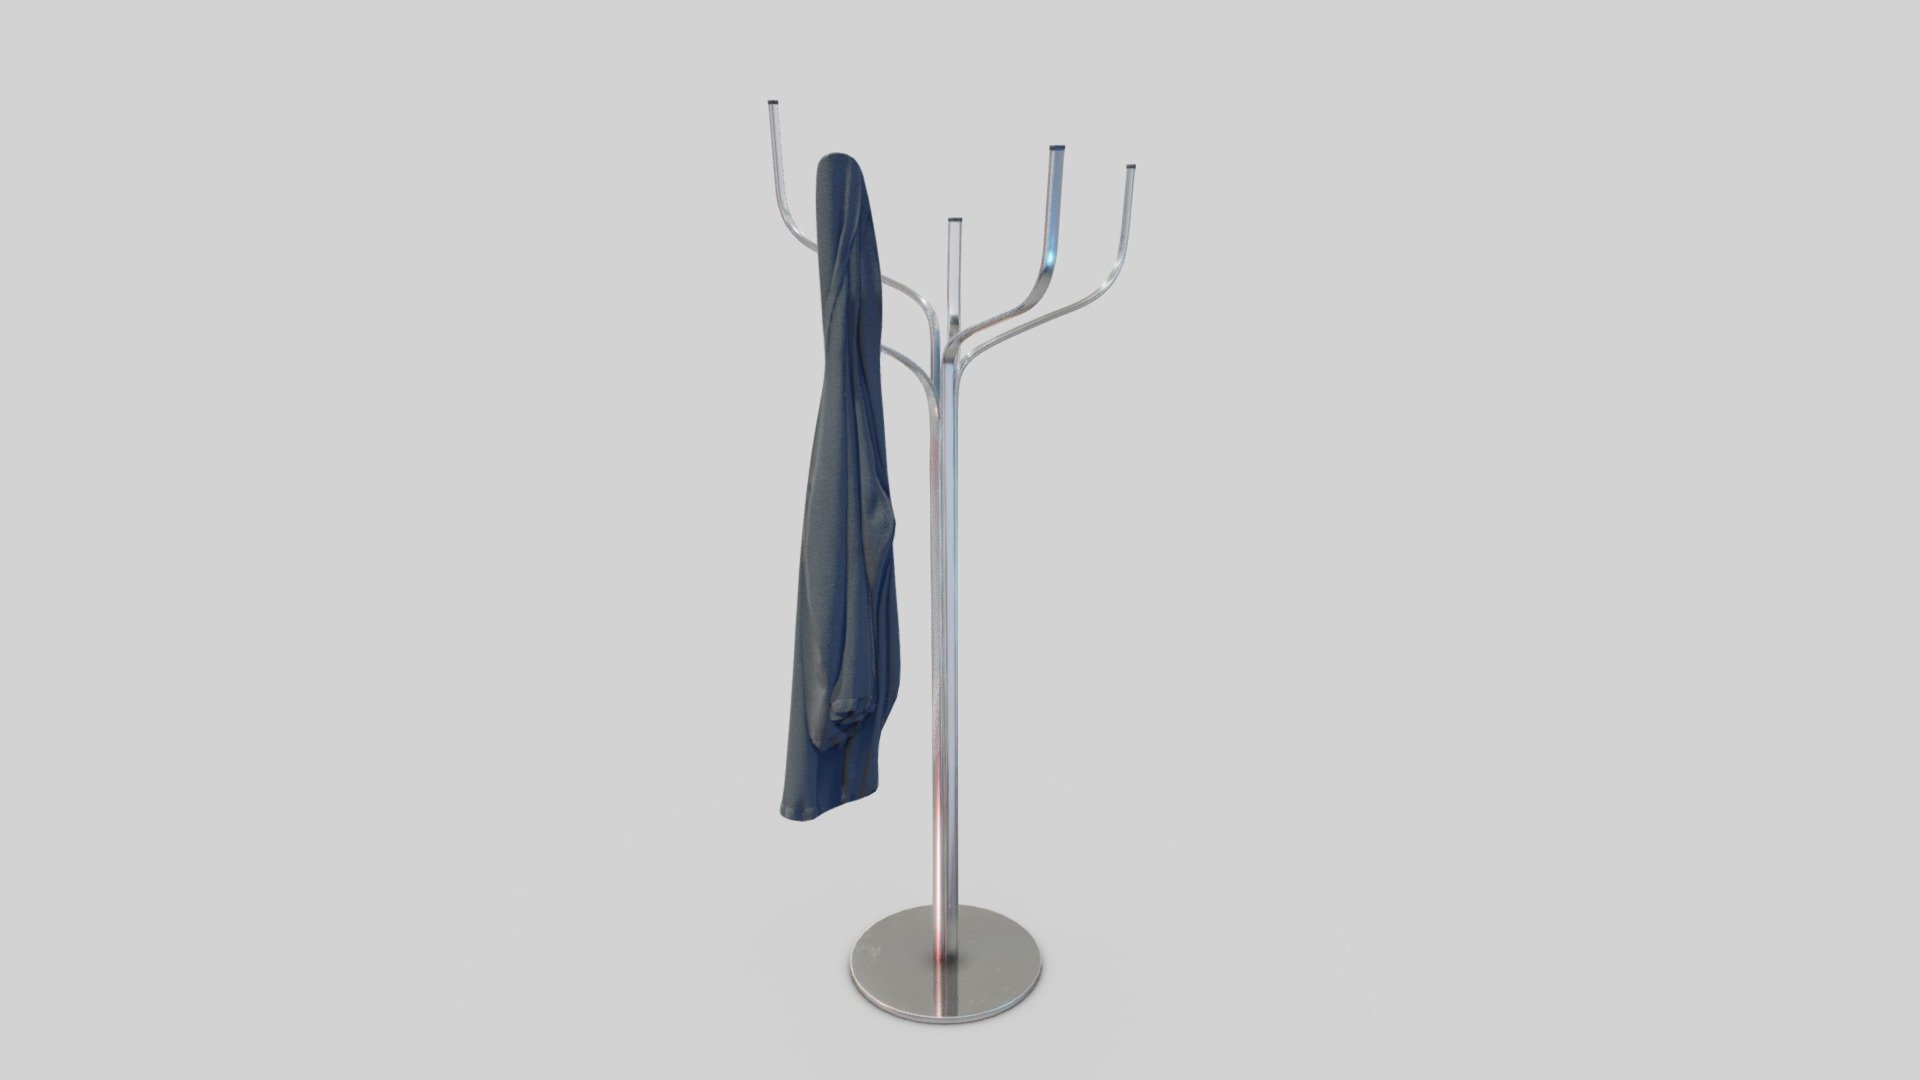 lothes Hanger desk 3D model with PBR maps 4096x4096 such as: • BaseColor • Metallic • Roughness • Ambient Occlusion • NormalDirectX •
Model in real scale (meters) 3d model